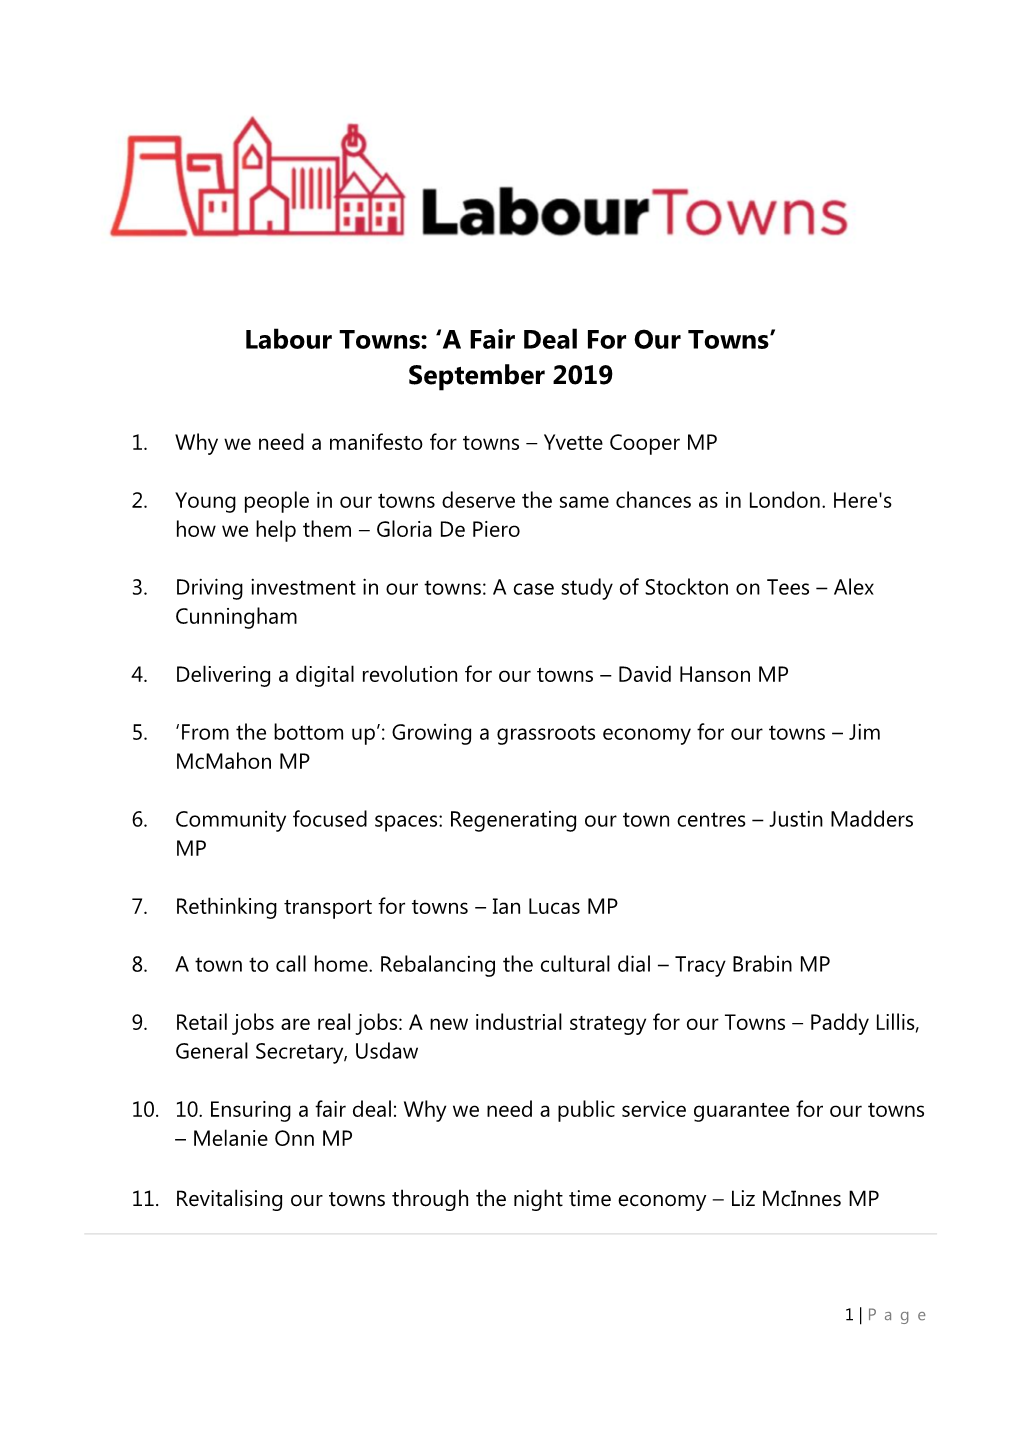 Labour Towns: ‘A Fair Deal for Our Towns’ September 2019